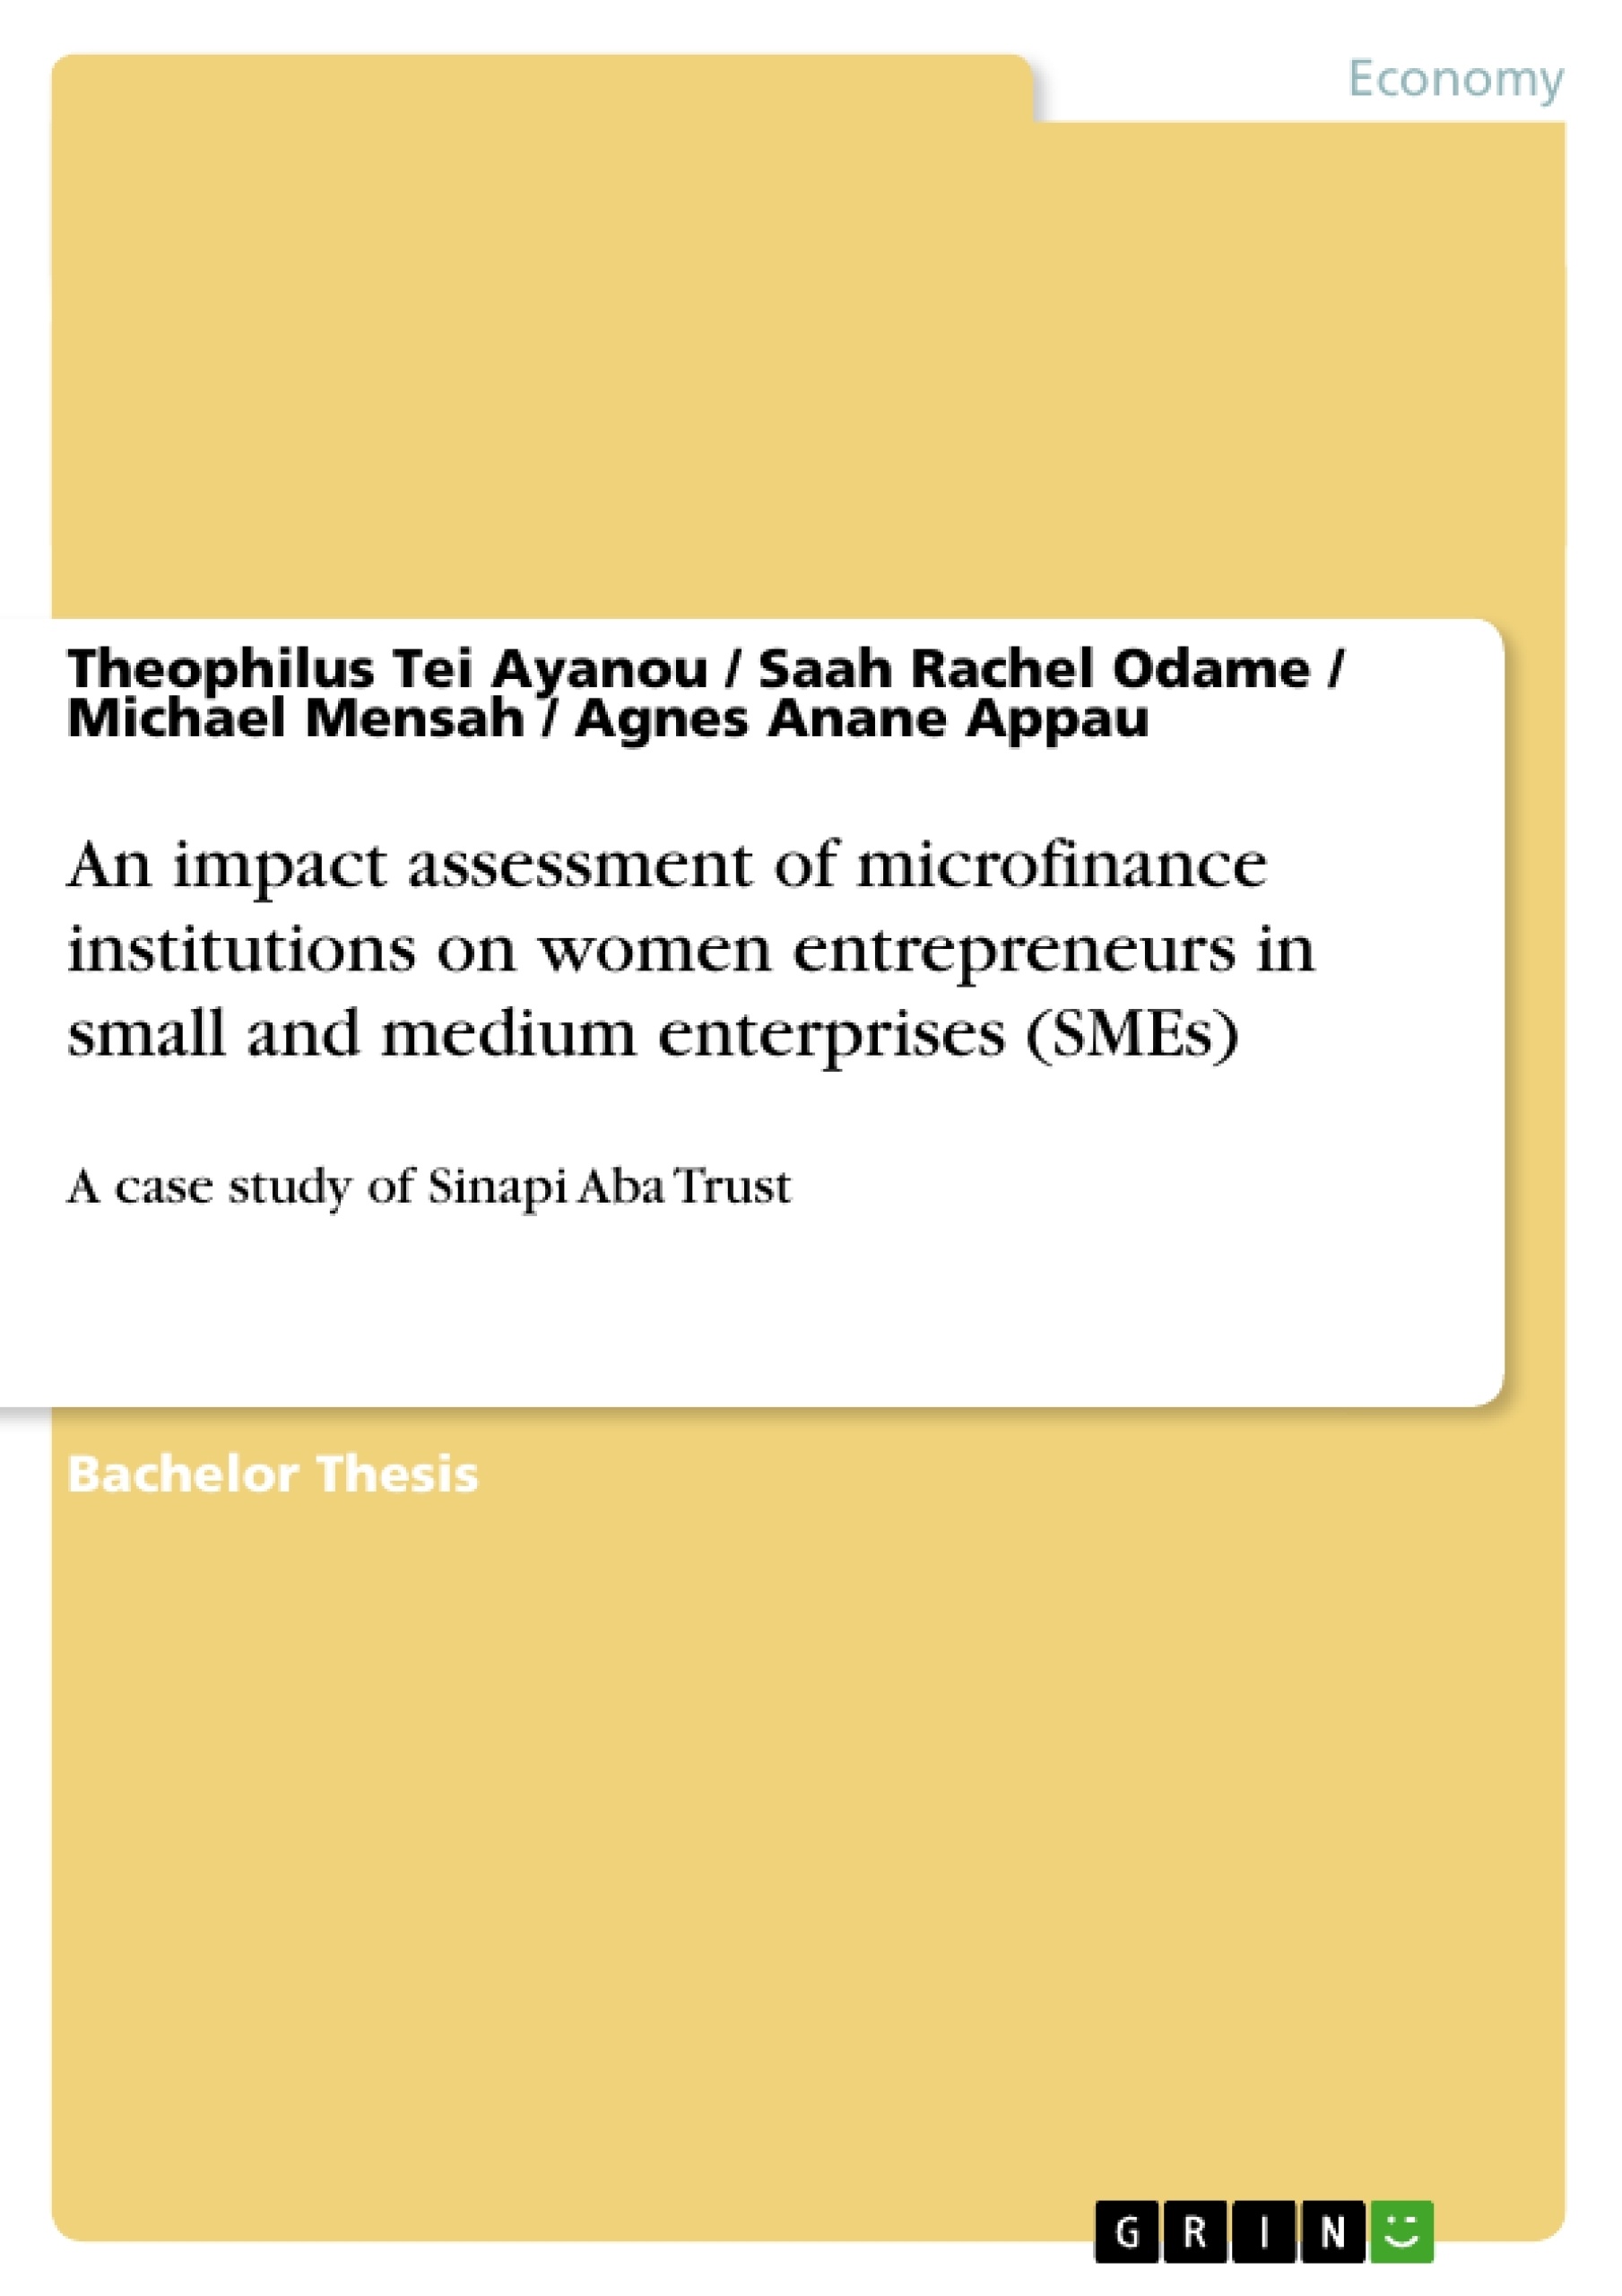 Title: An impact assessment of microfinance institutions on women entrepreneurs in small and medium enterprises (SMEs)